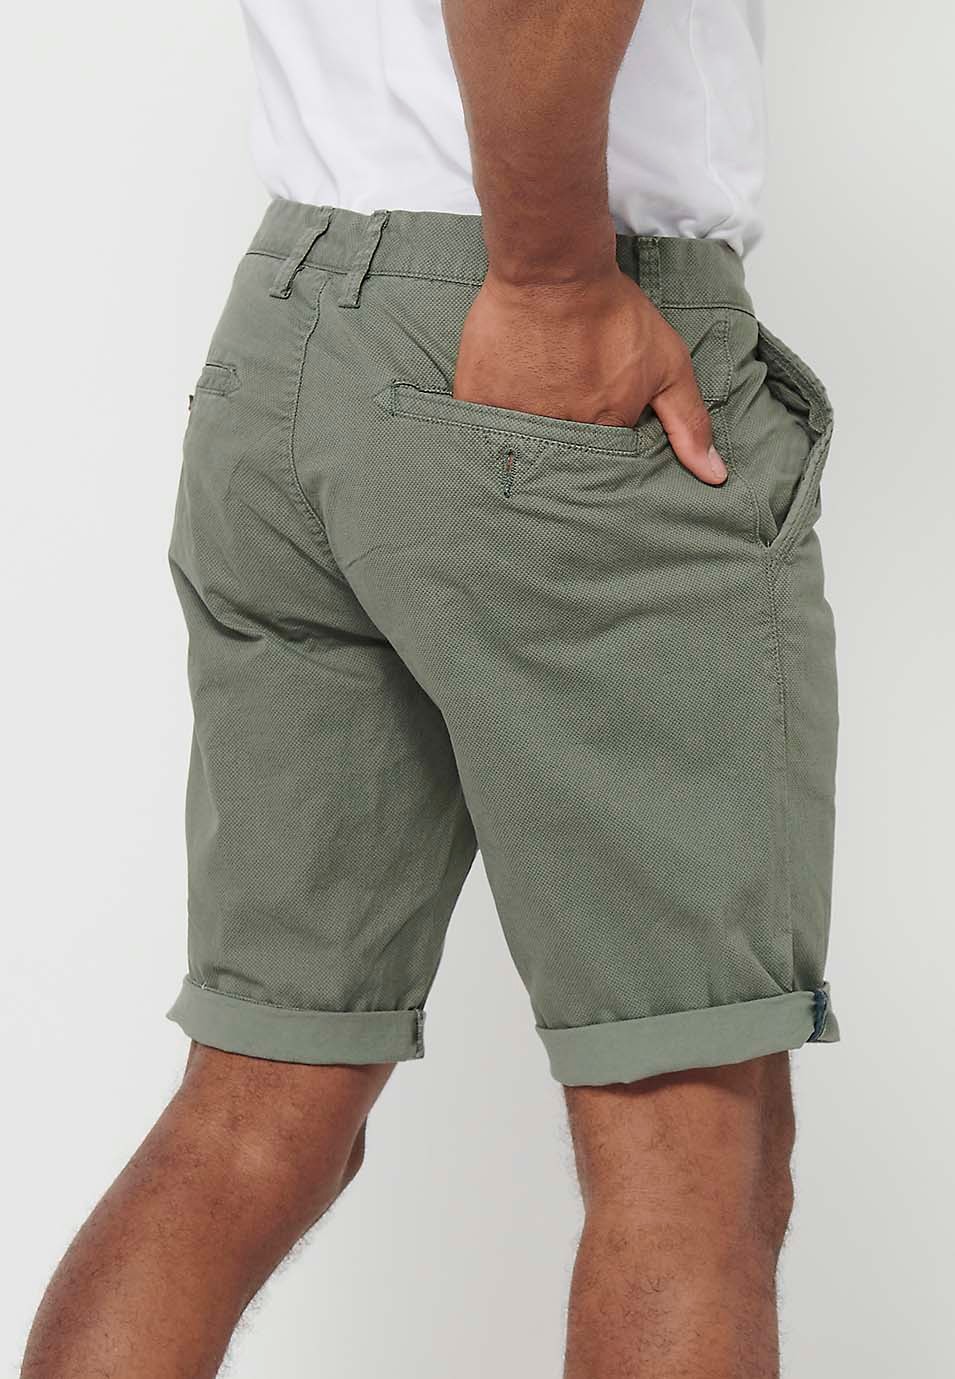 Bermuda Chino Shorts with Turn-Up Finish with Front Zipper and Button Closure with Four Pockets in Green Color for Men 5